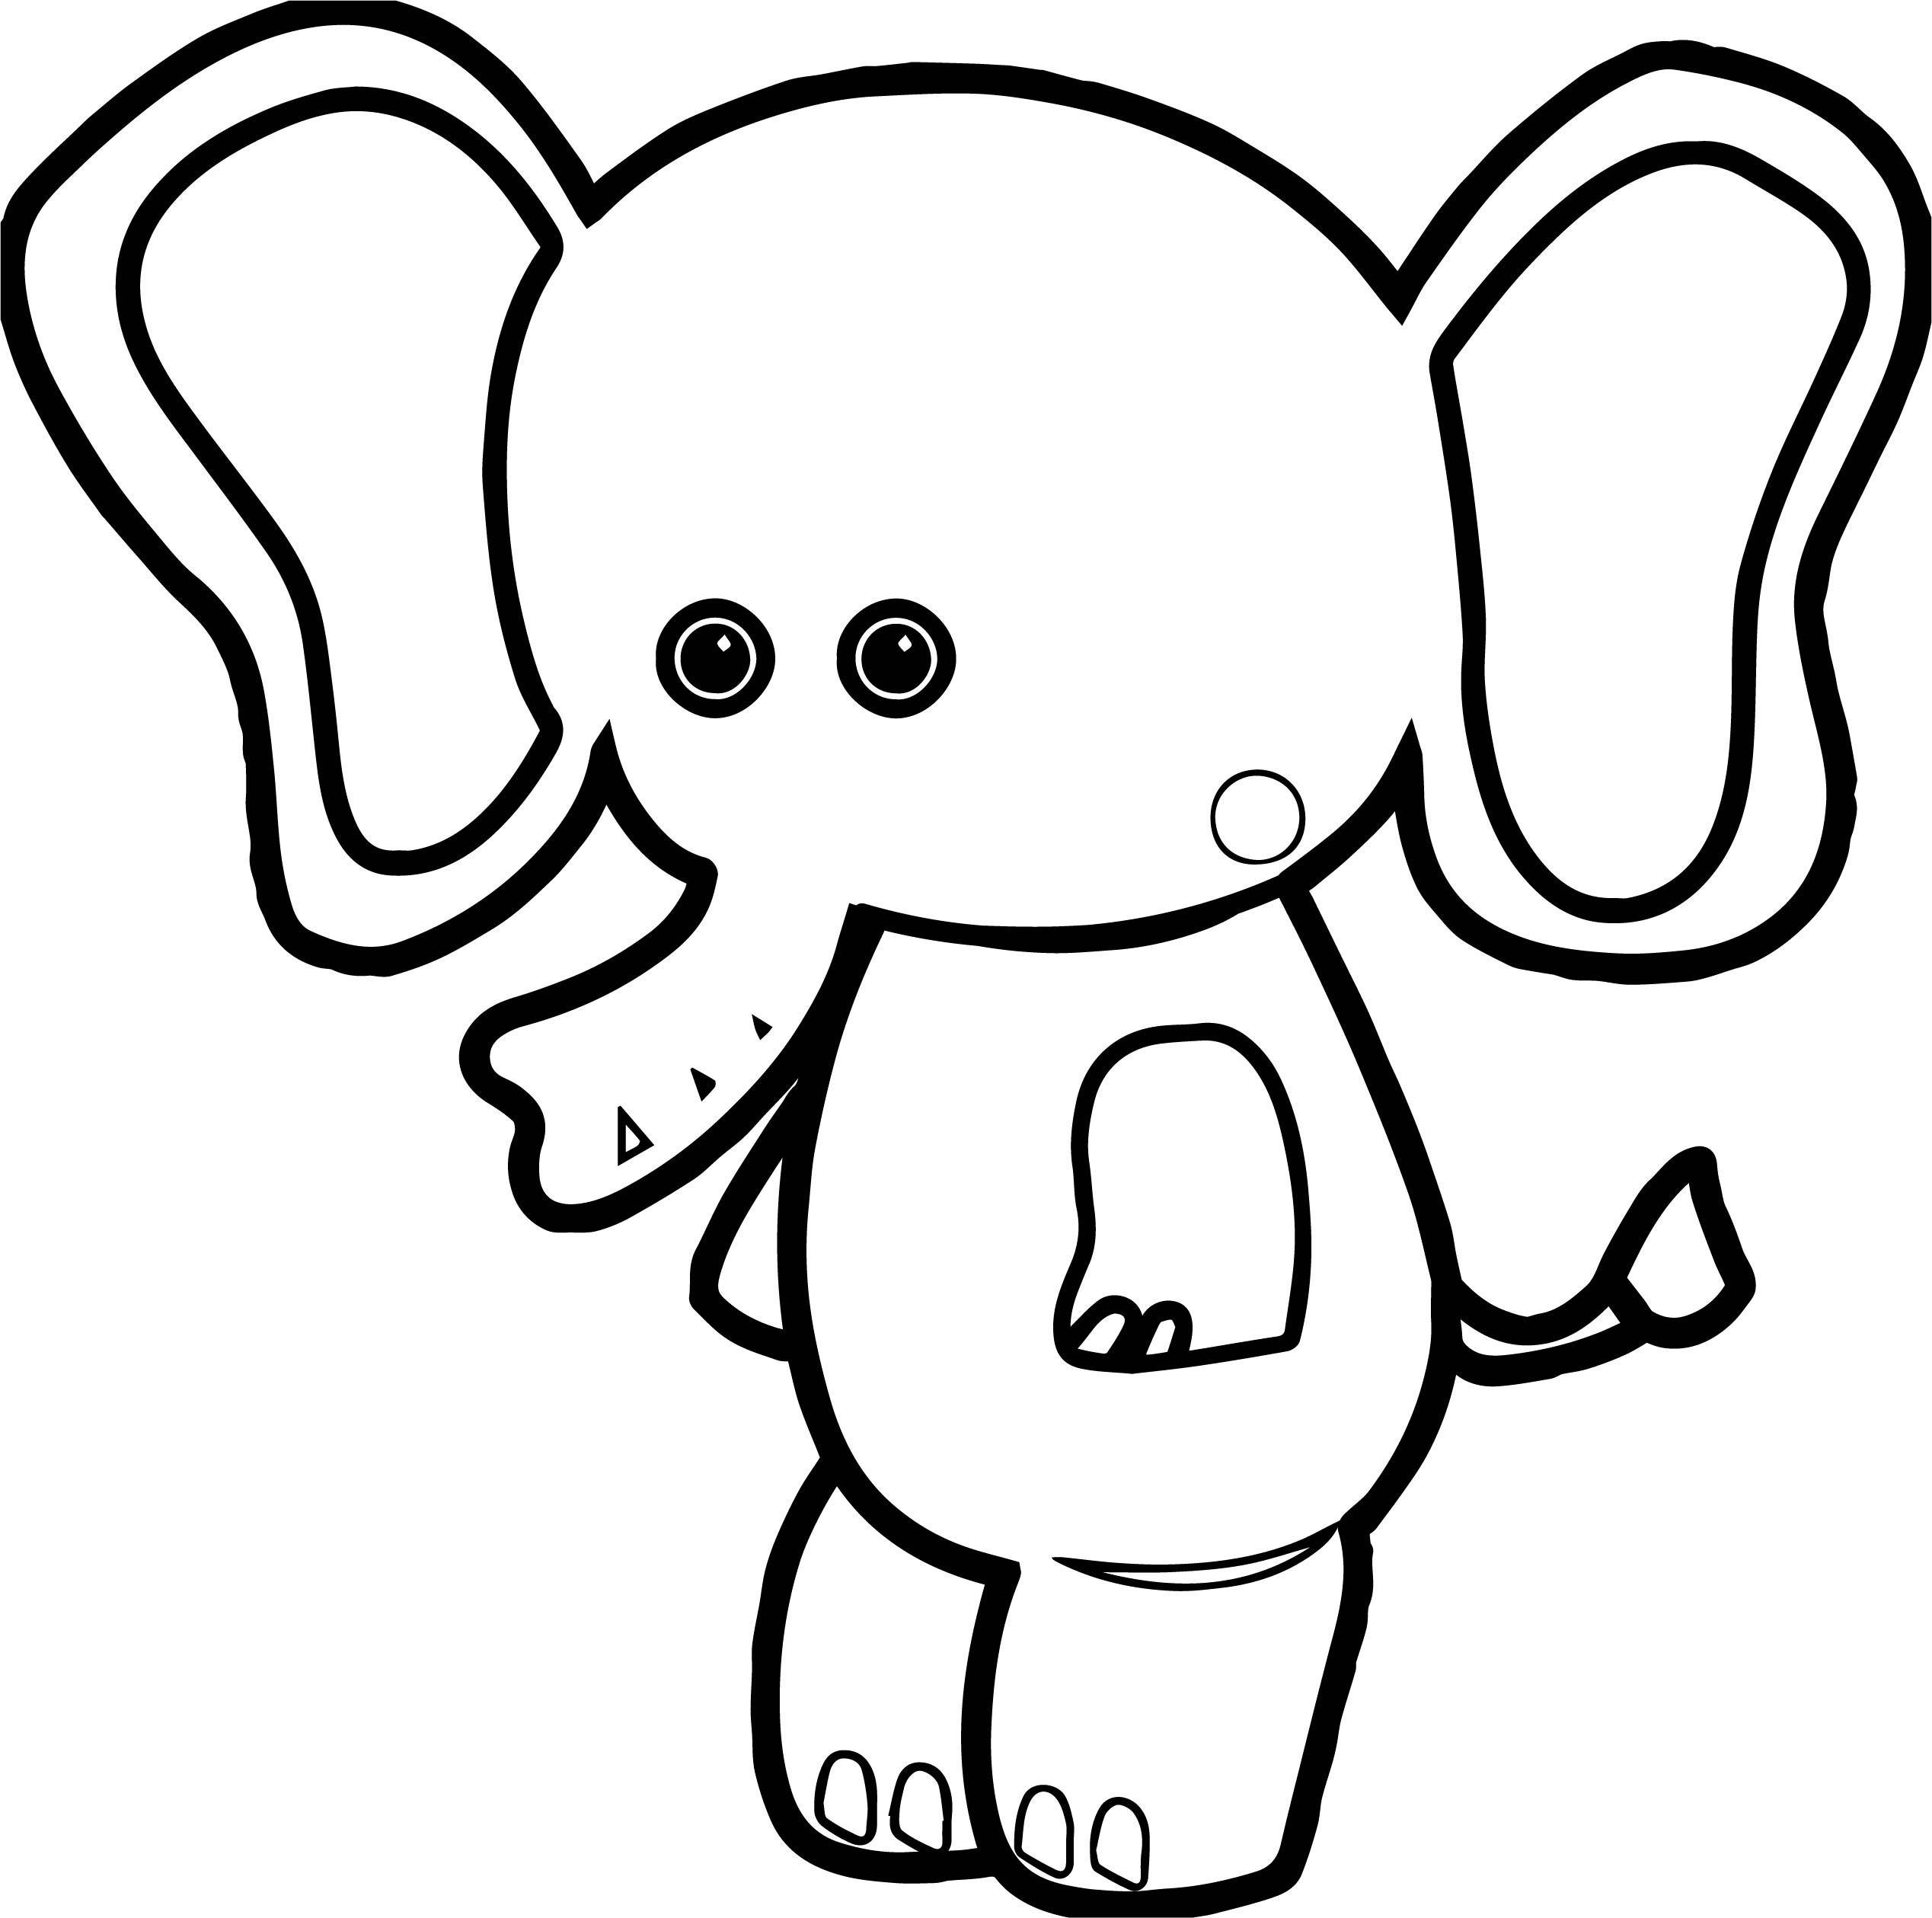 Baby Farm Animal Coloring Pages
 Baby Farm Animal Elephant Coloring Page